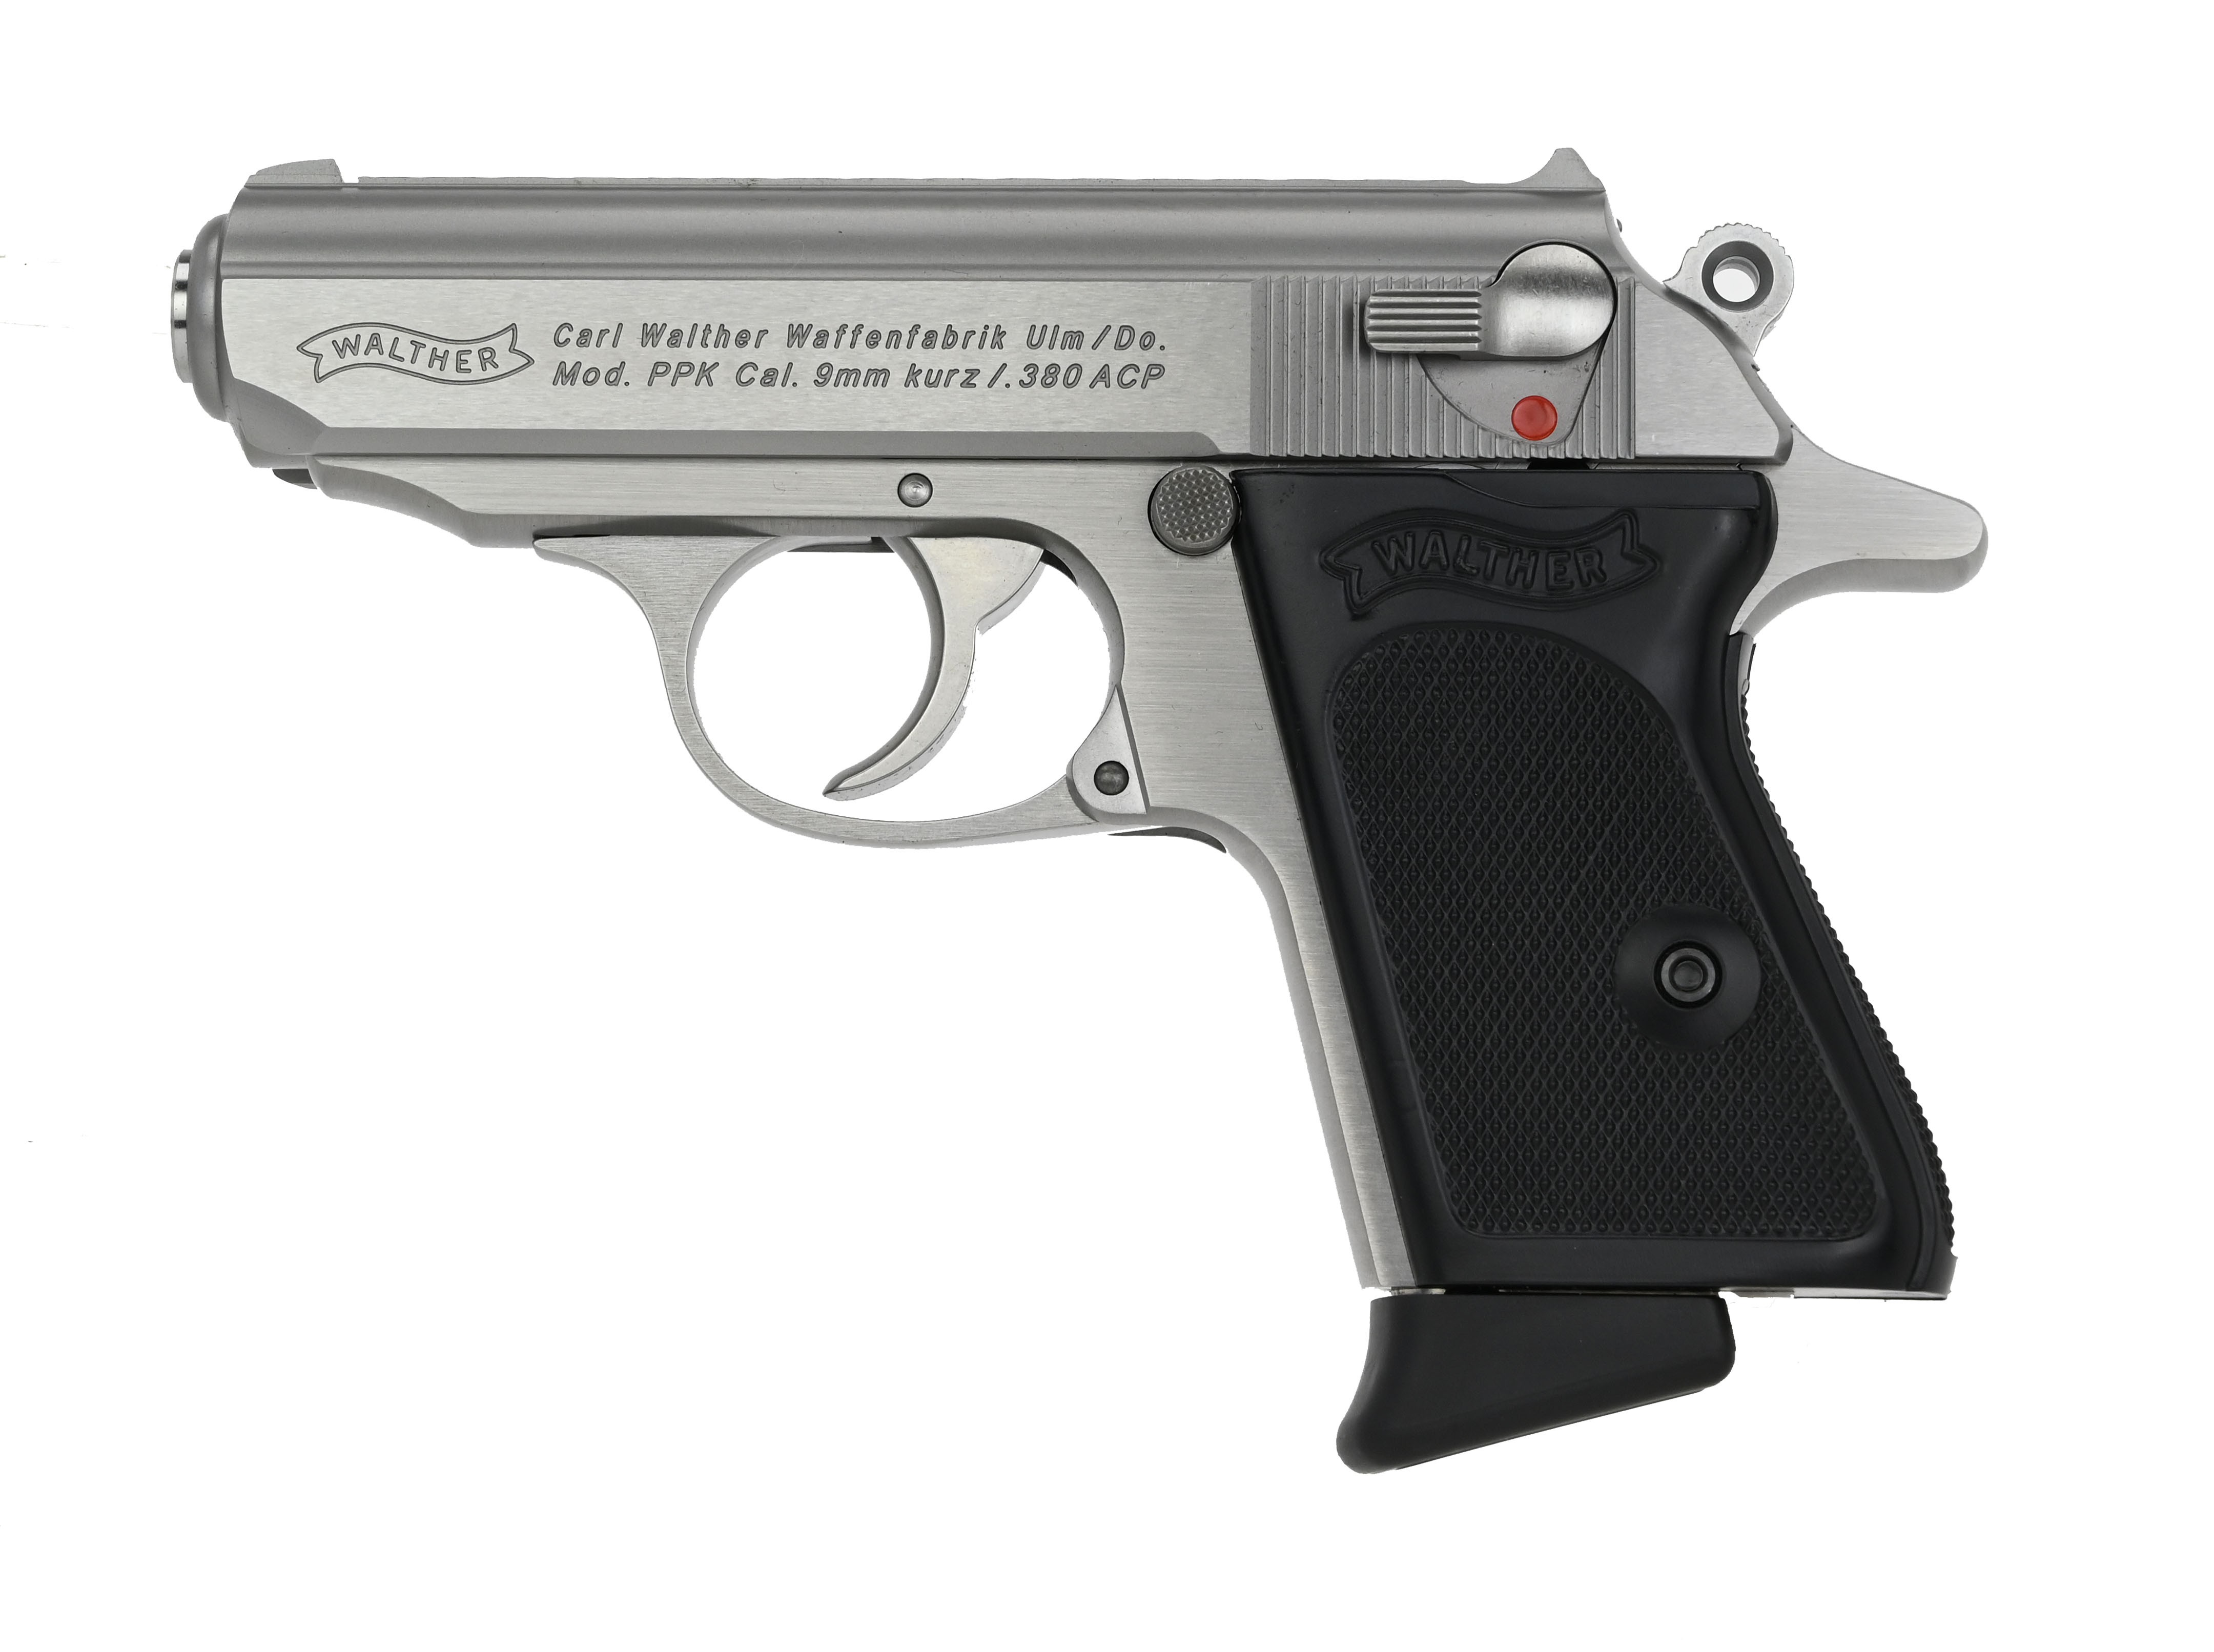 Walther PPK .380 ACP (nPR50310) New.